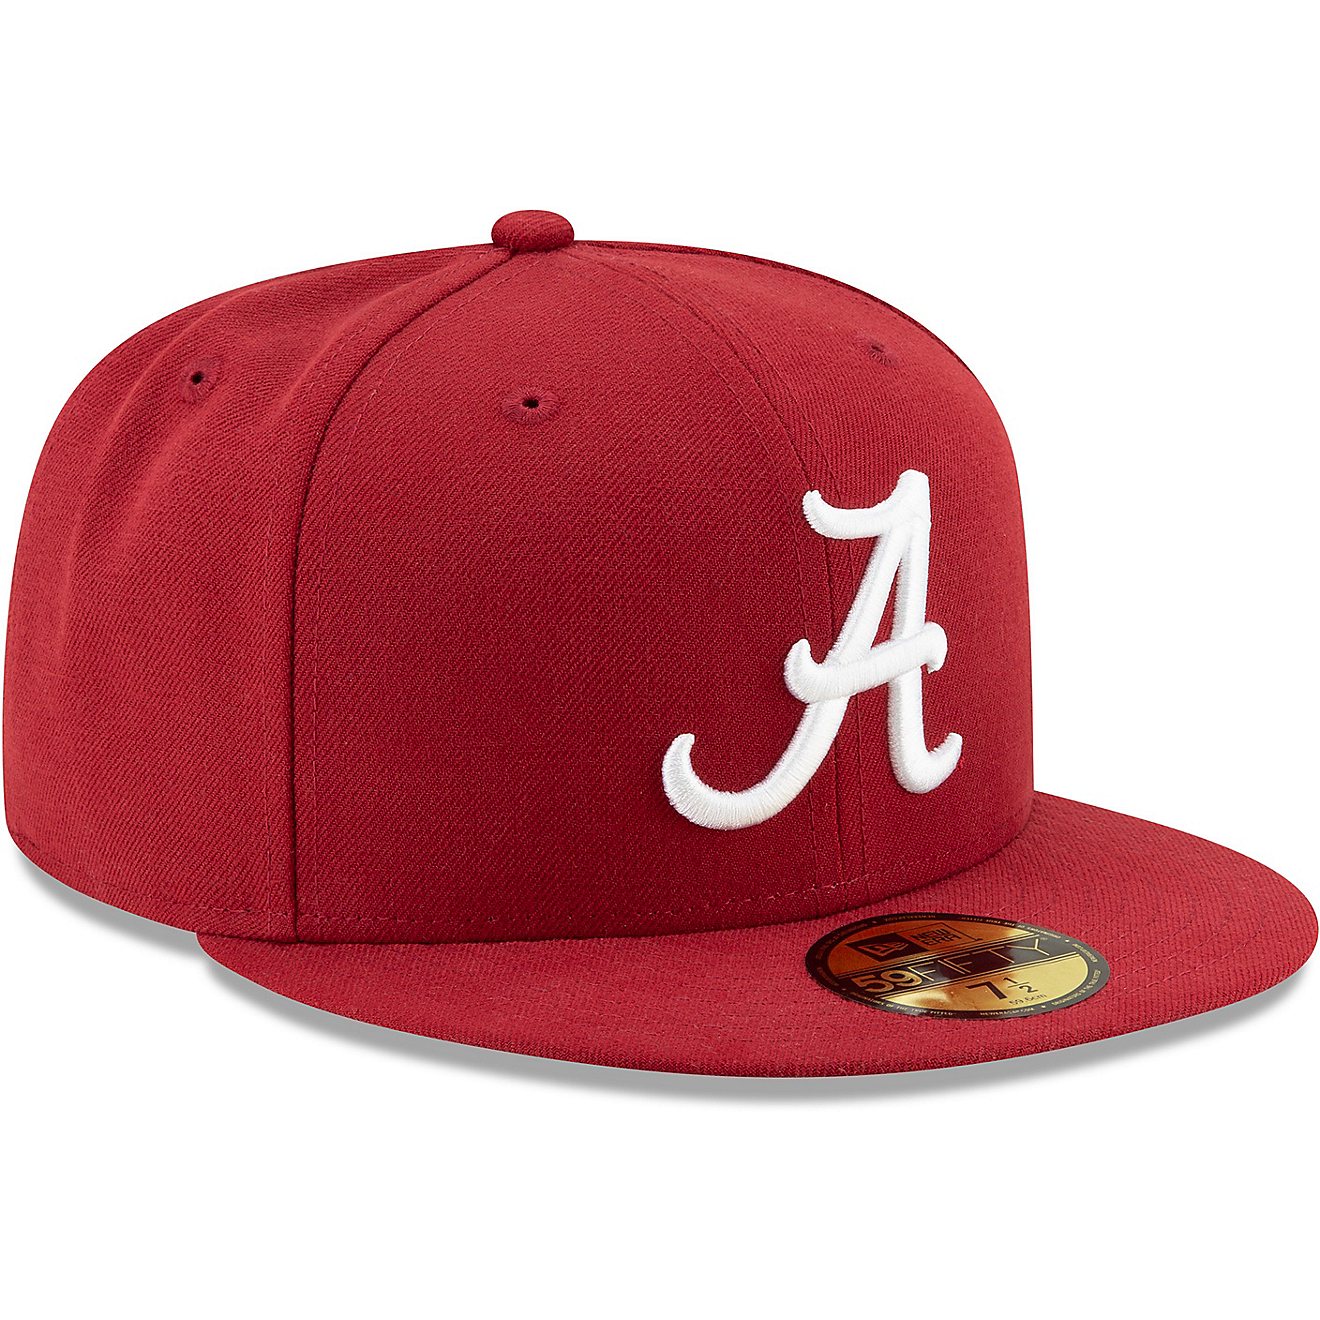 New Era Men's University of Alabama 59FIFTY Basic Fitted Cap                                                                     - view number 1